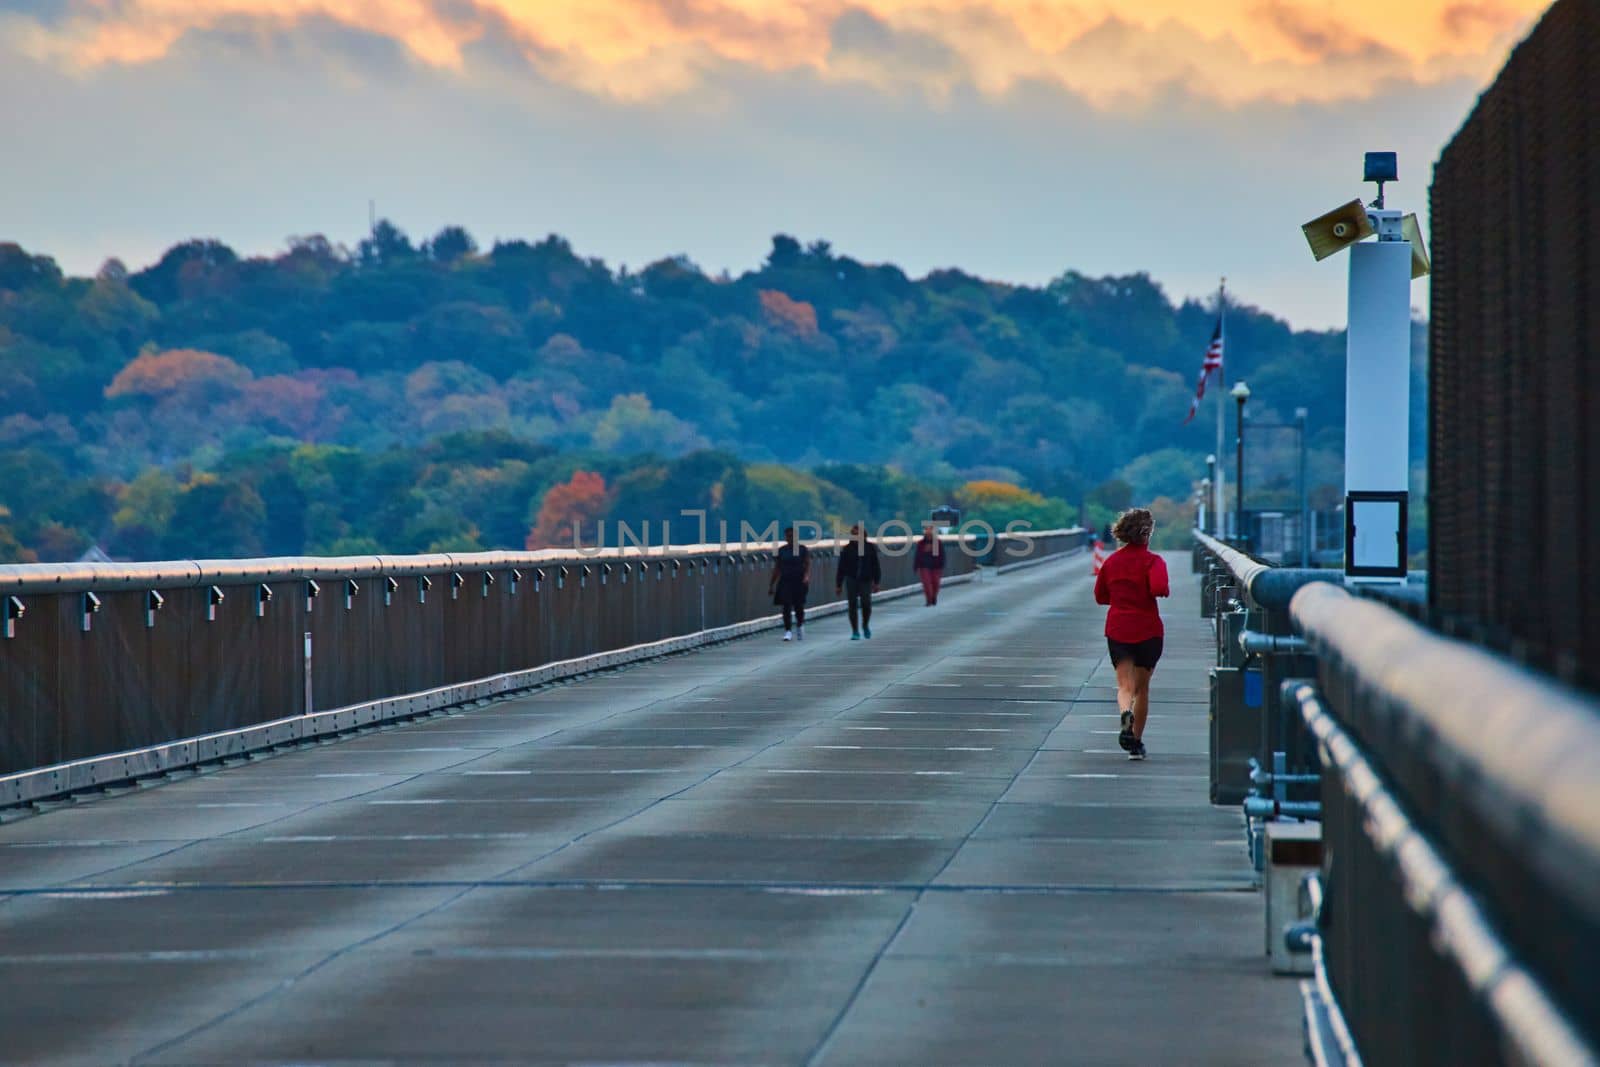 Image of Joggers running along long cement bridge boardwalk with forests in background